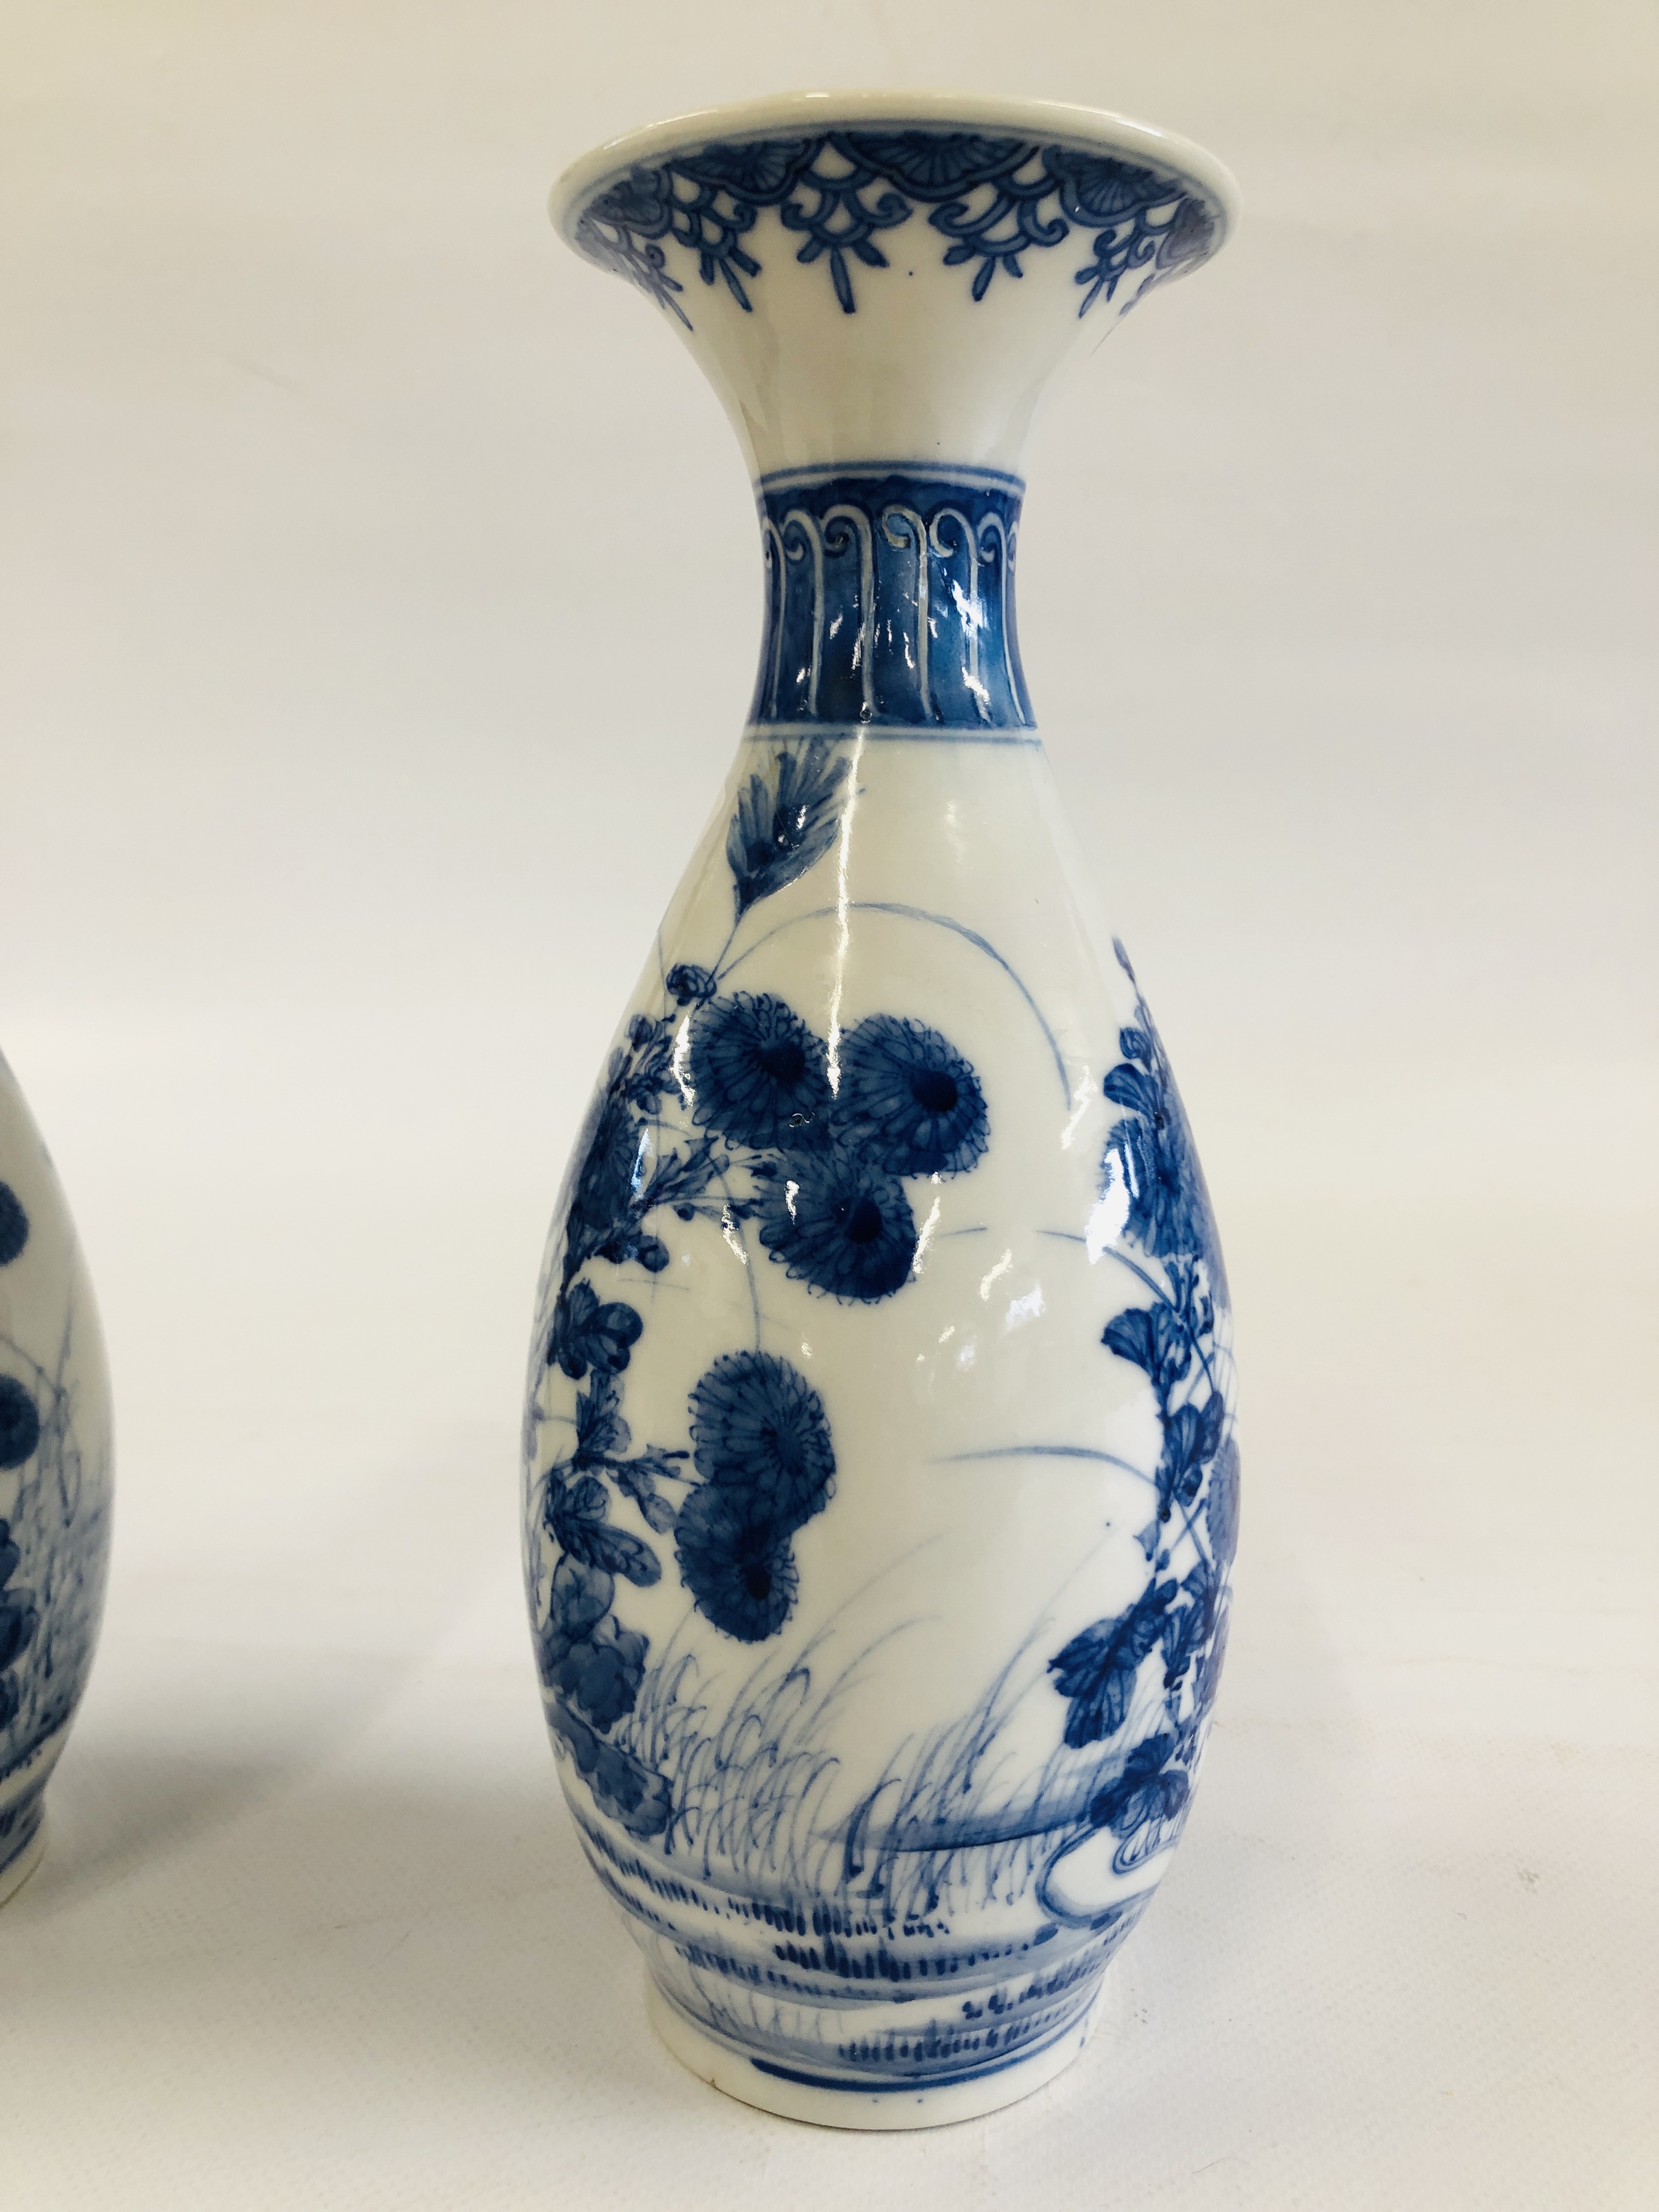 A PAIR OF DECORATIVE BLUE AND WHITE ORIENTAL VASES DEPICTING A PREGNANT WOMAN SEATED AMONGST THE - Image 7 of 13